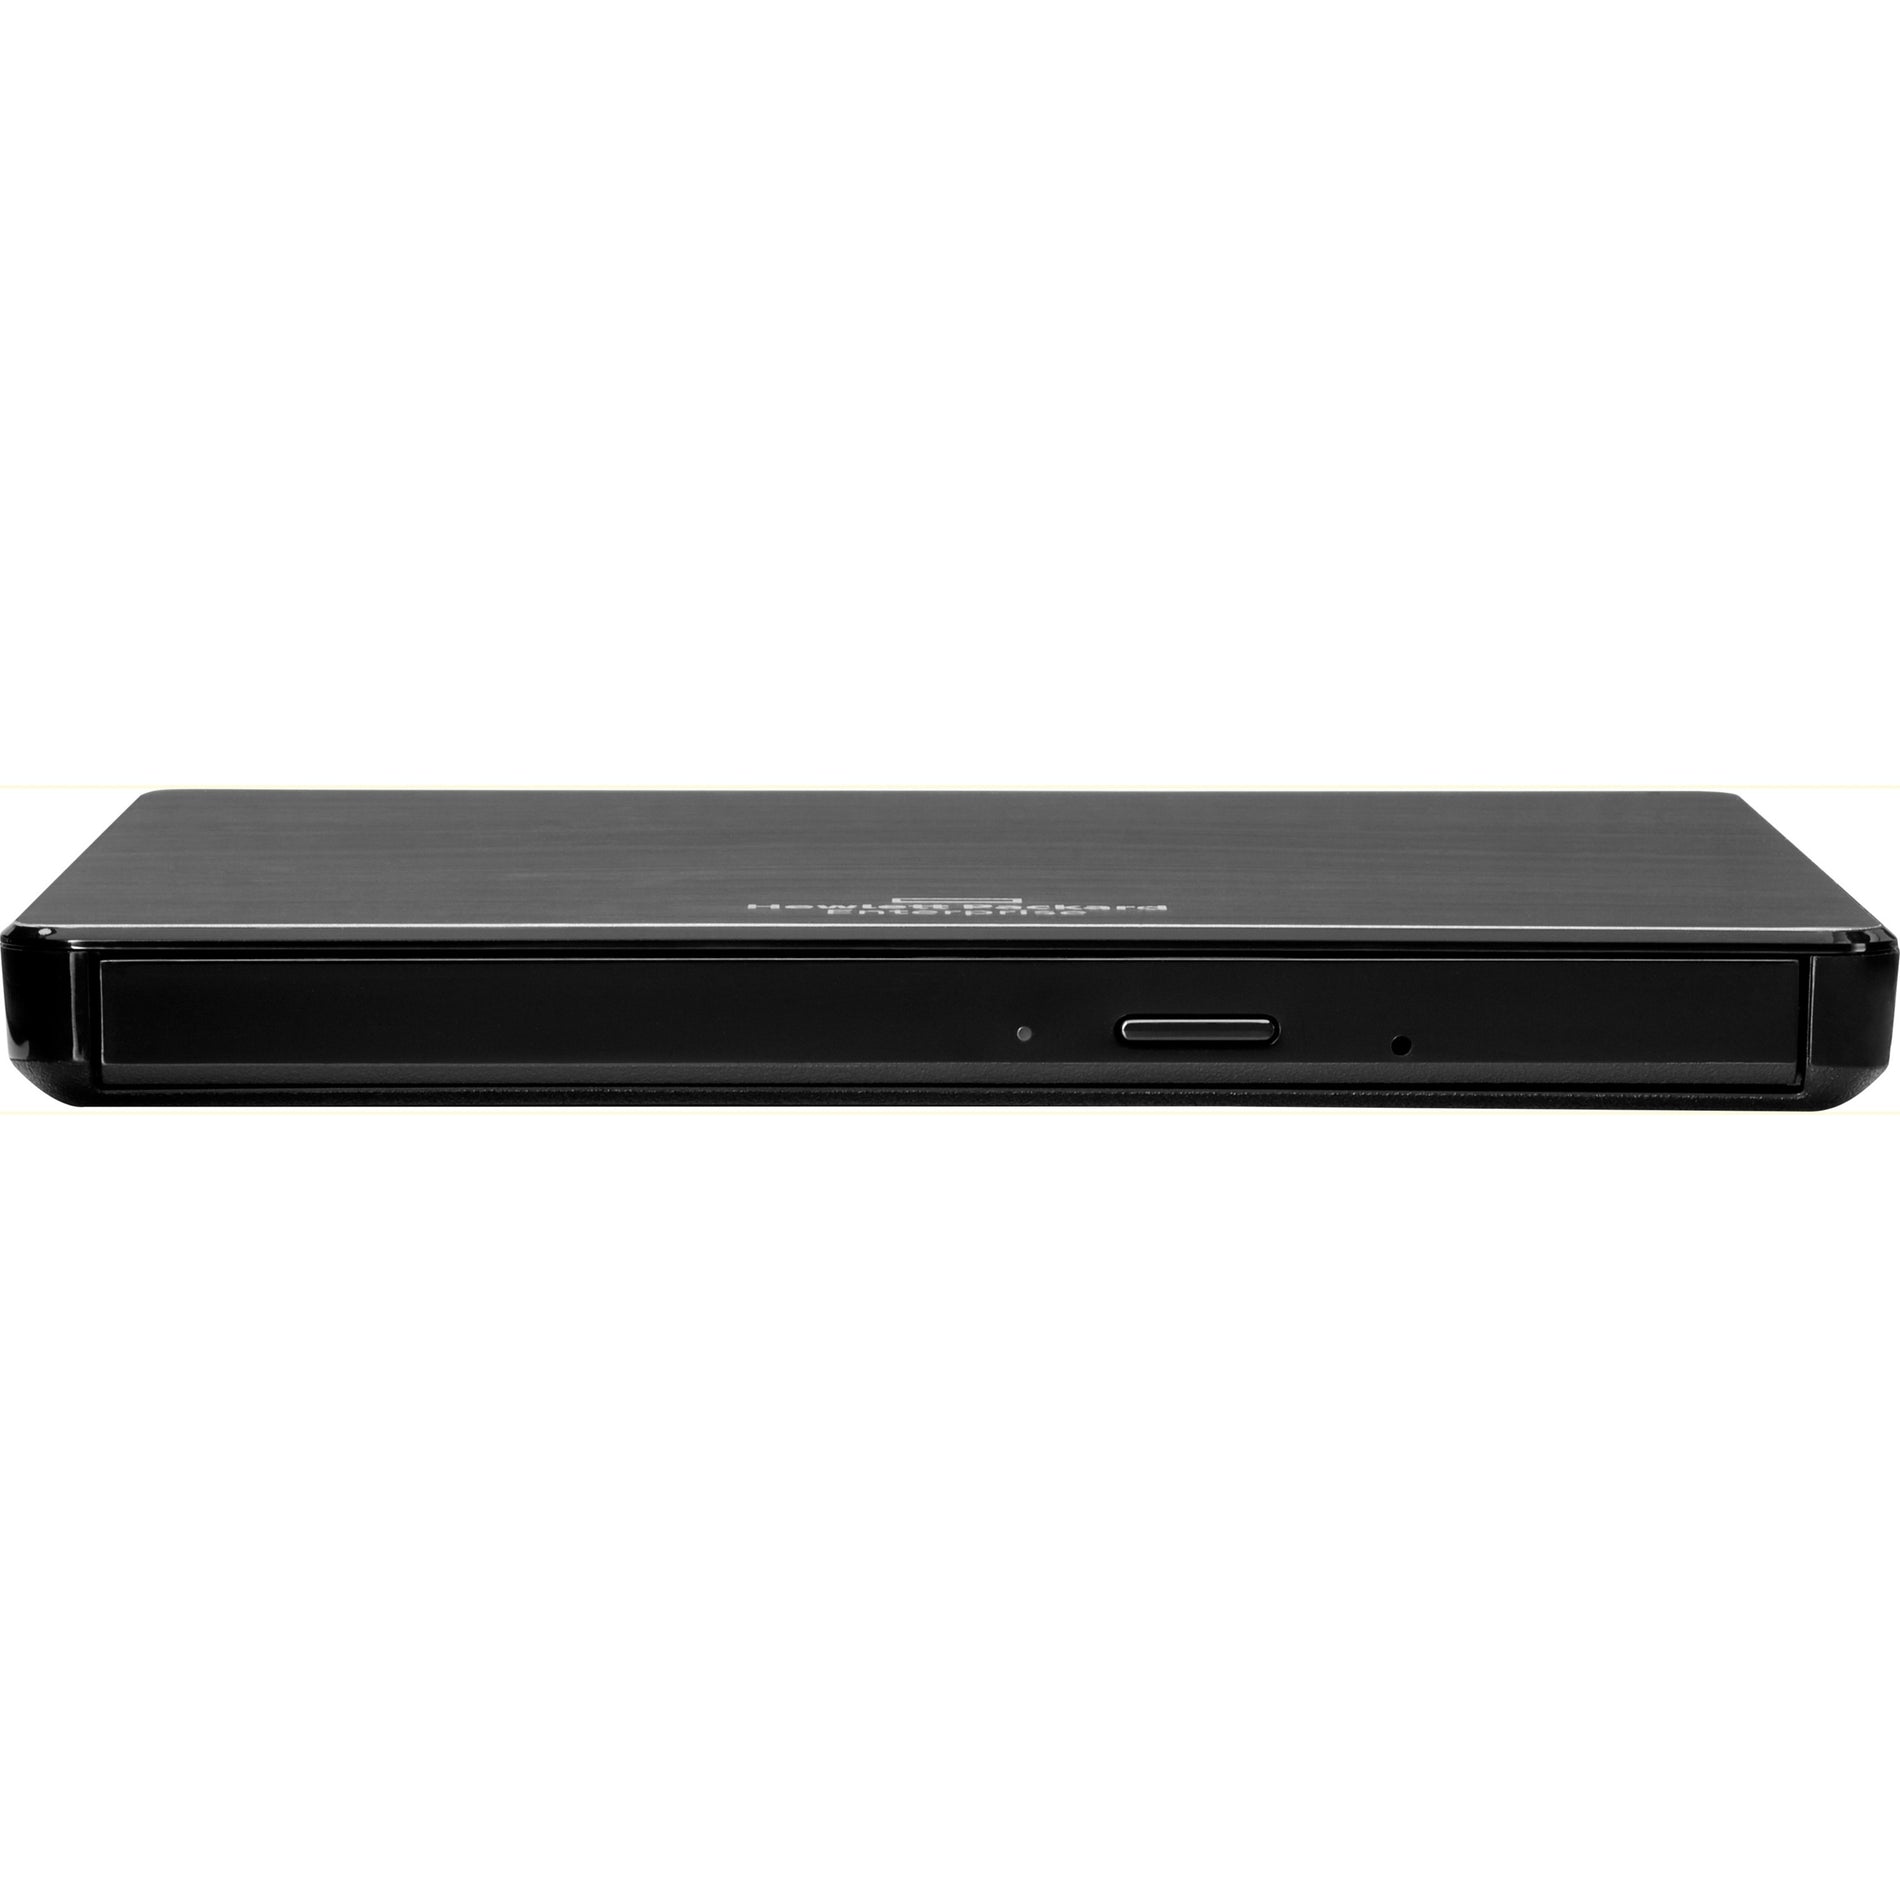 HPE 701498-B21 Mobile USB Non Leaded System DVD RW Drive, External DVD-Writer